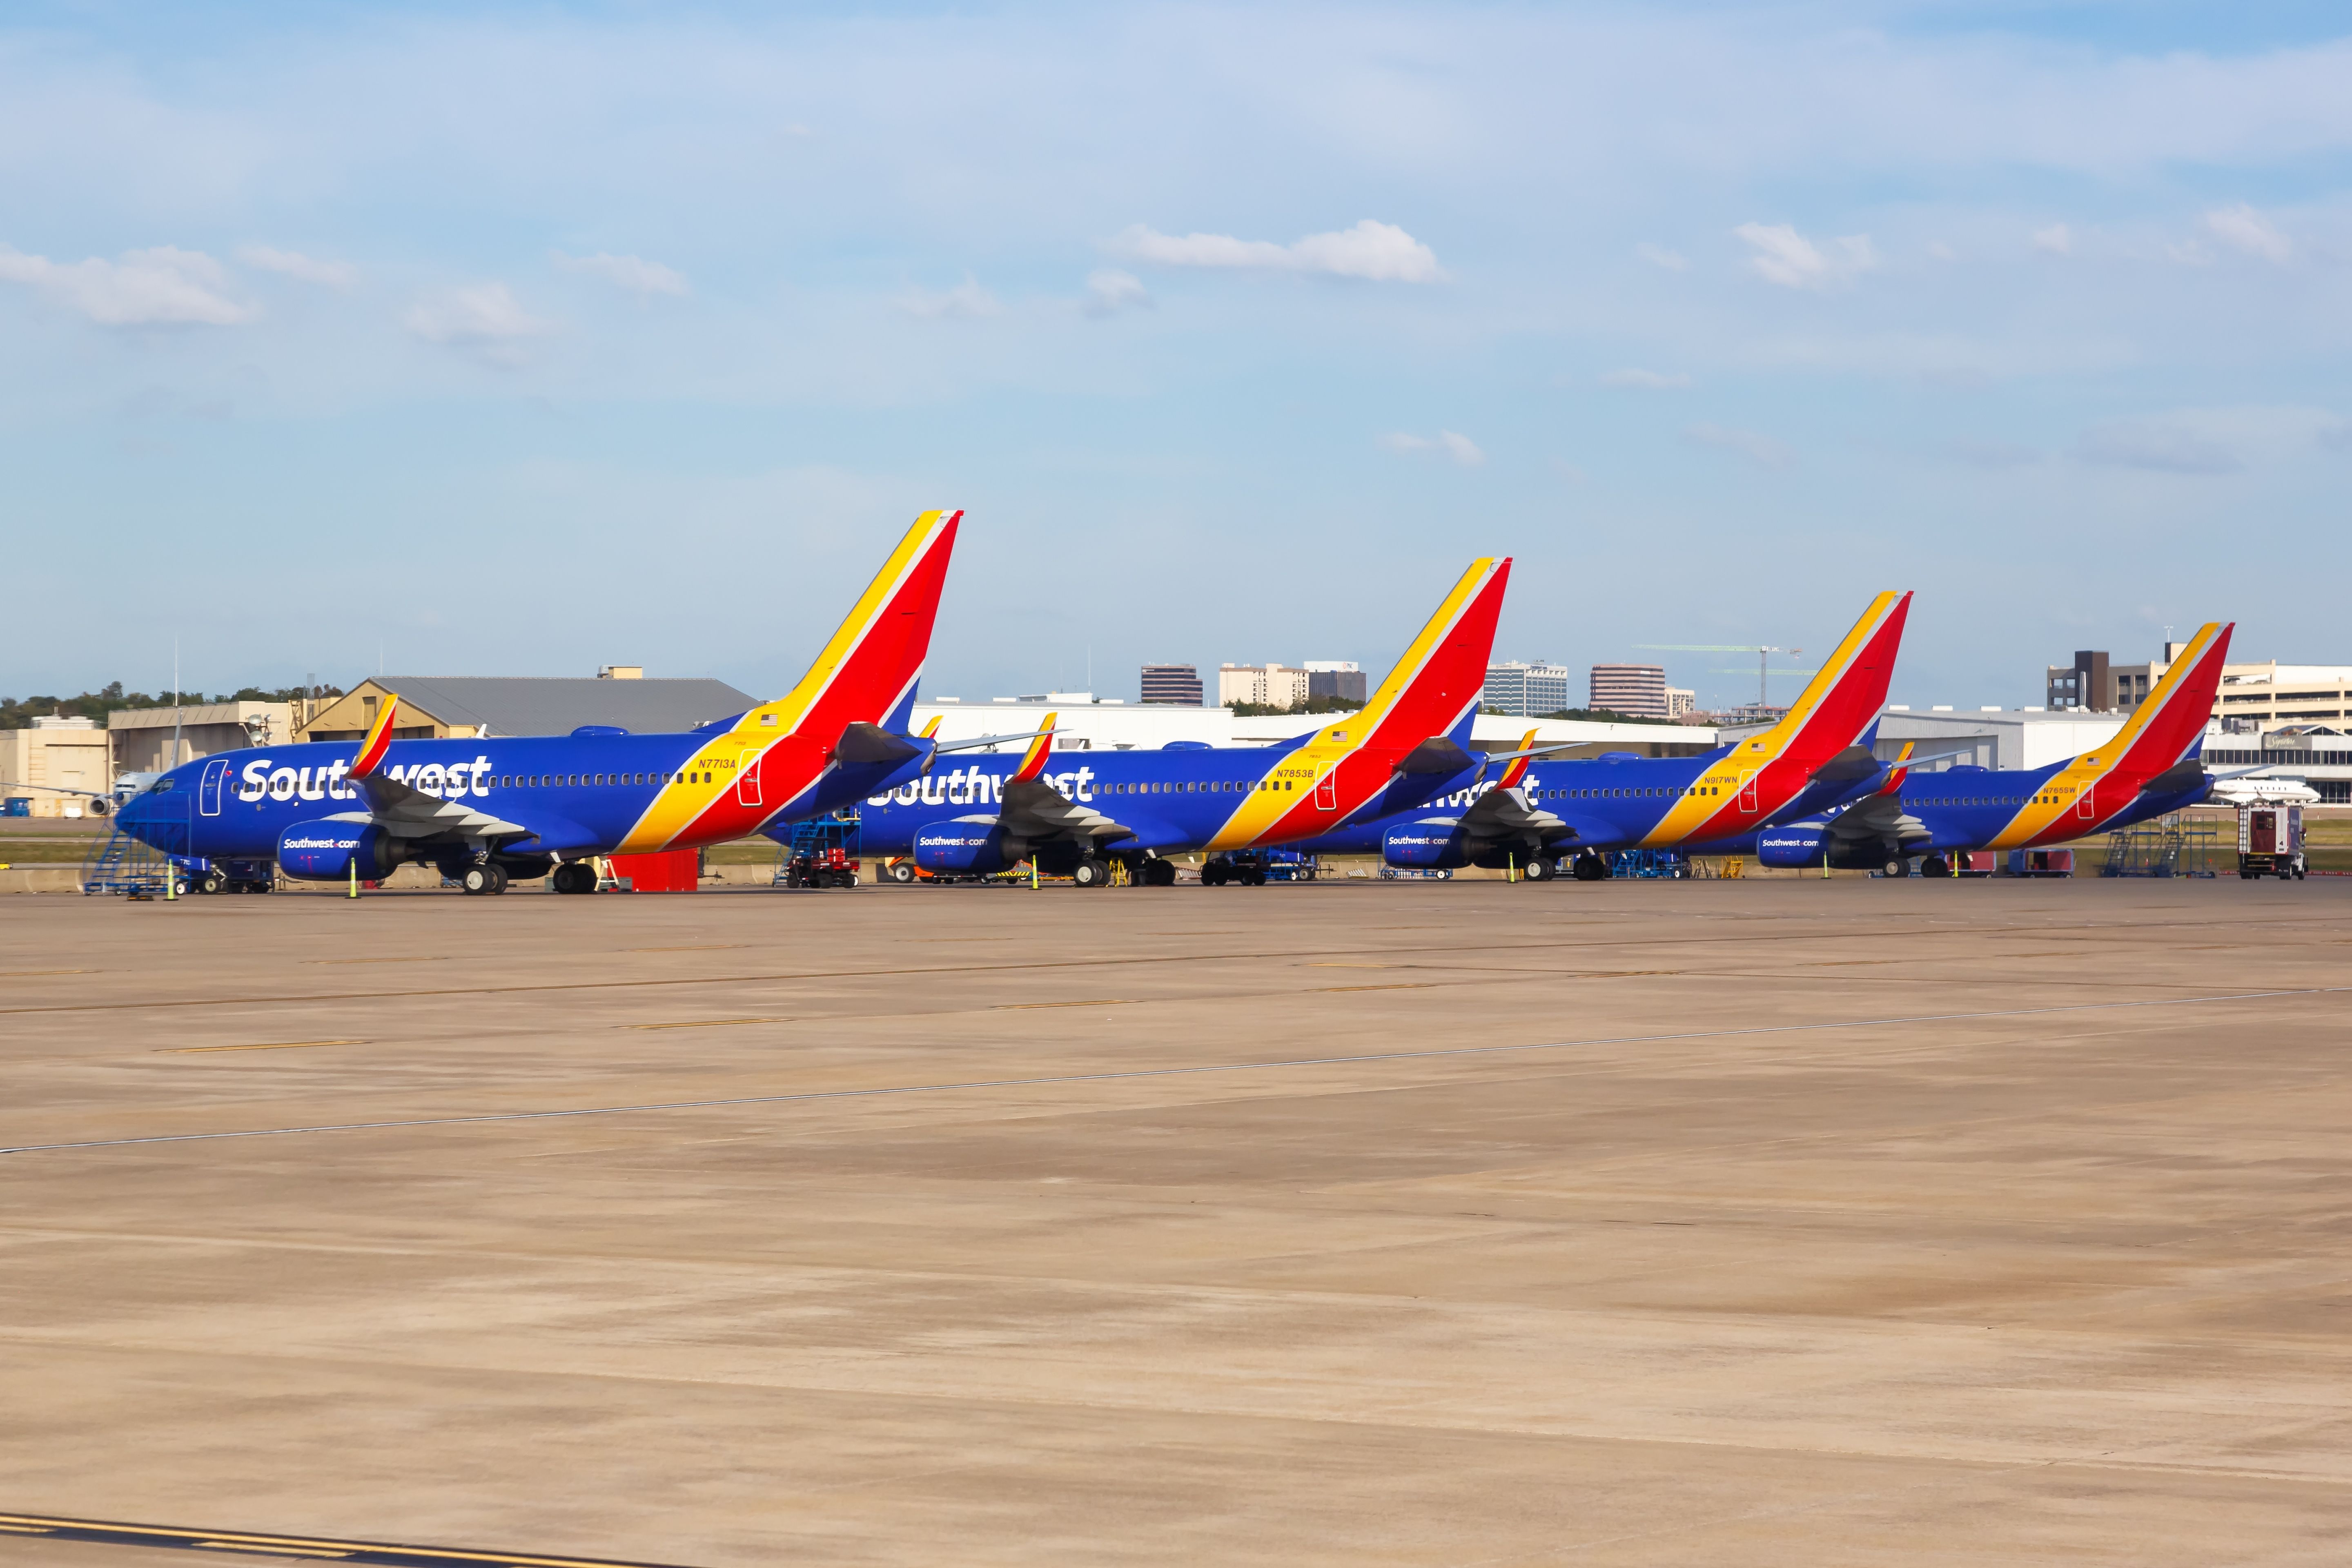 Several Southwest aircraft lined up in Dallas Love Field